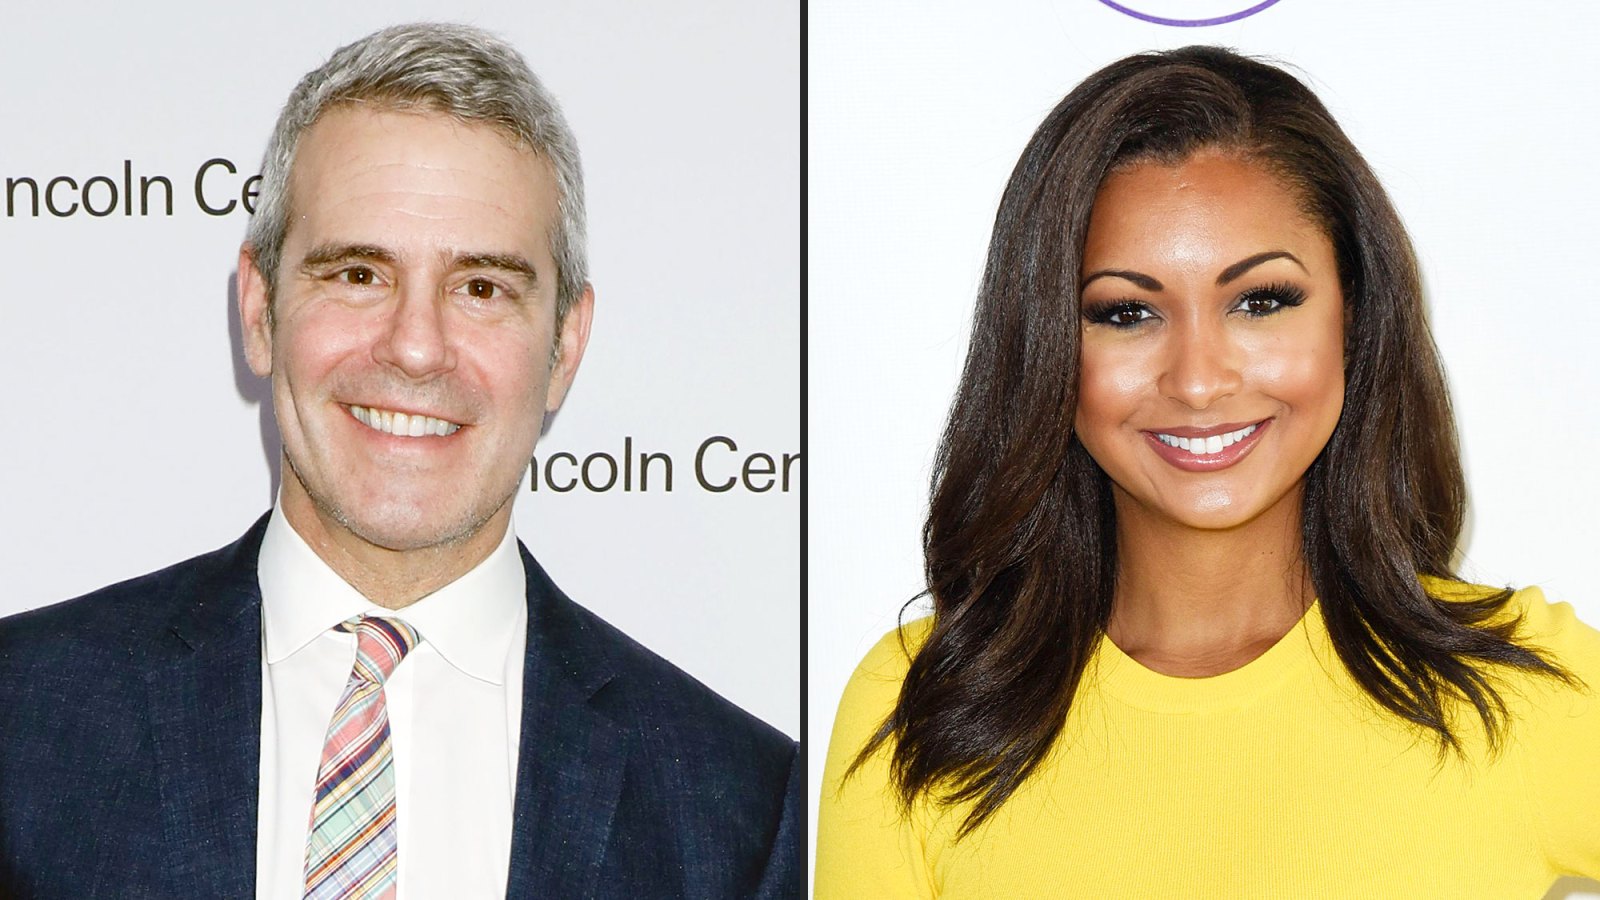 Andy Cohen Confirms Eboni Williams Role on Season 13 of The Real Housewives of New York City